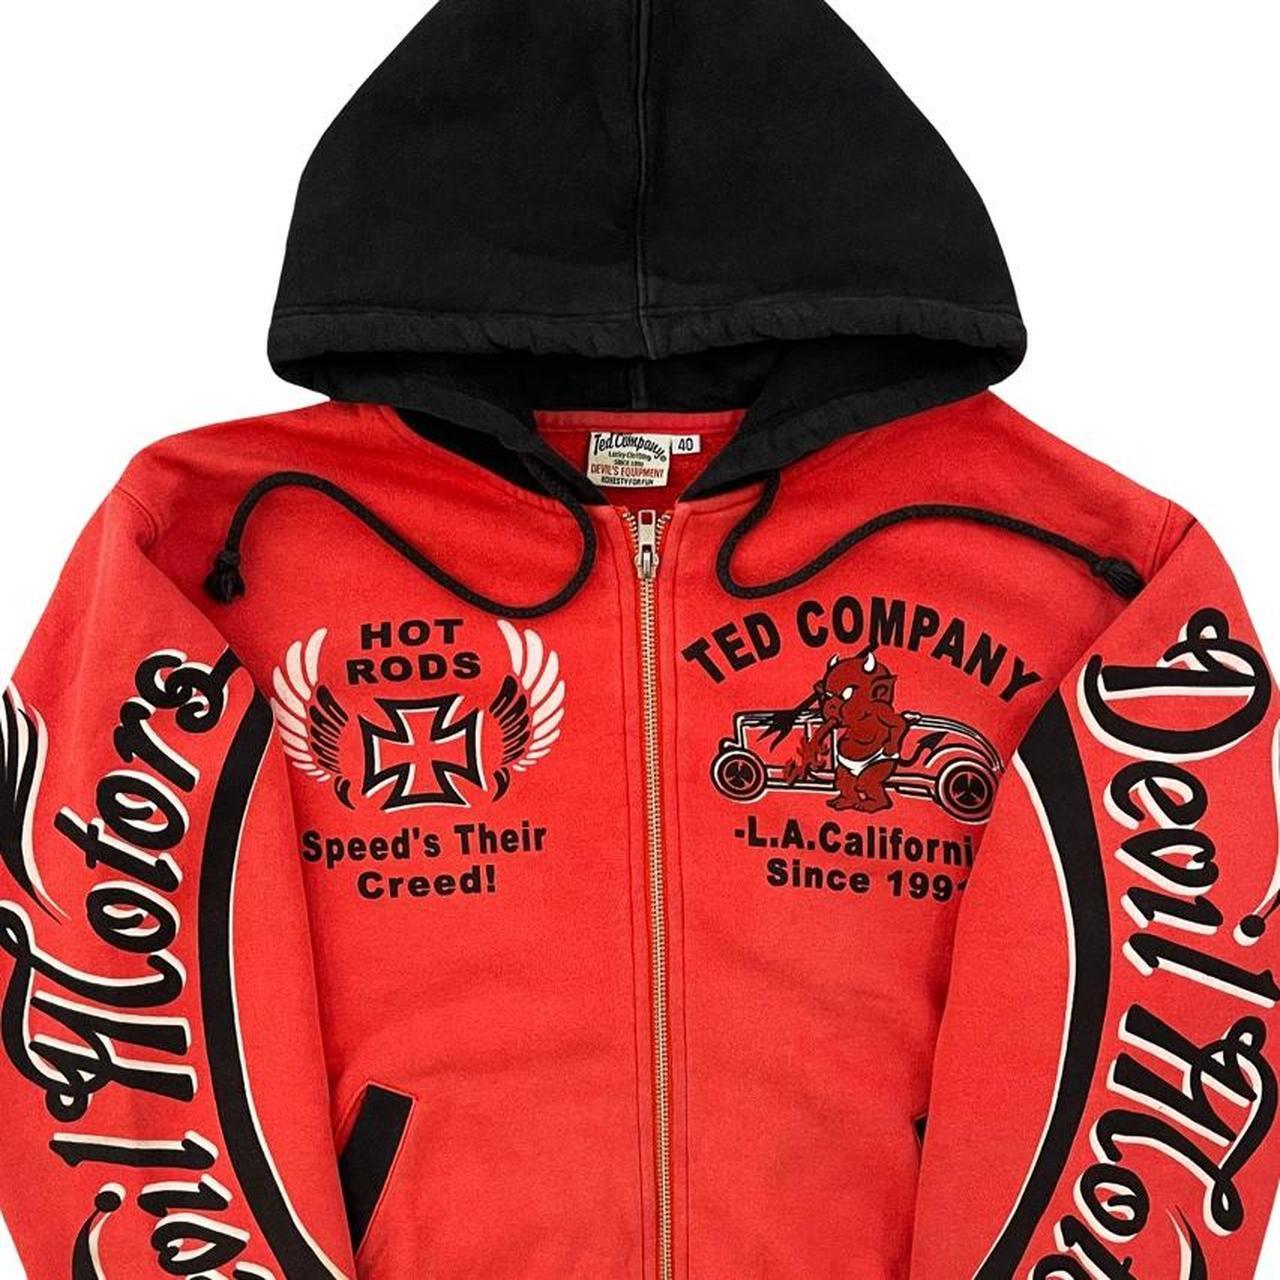 Tedman's Lucky Red Devil Hoodie - Known Source